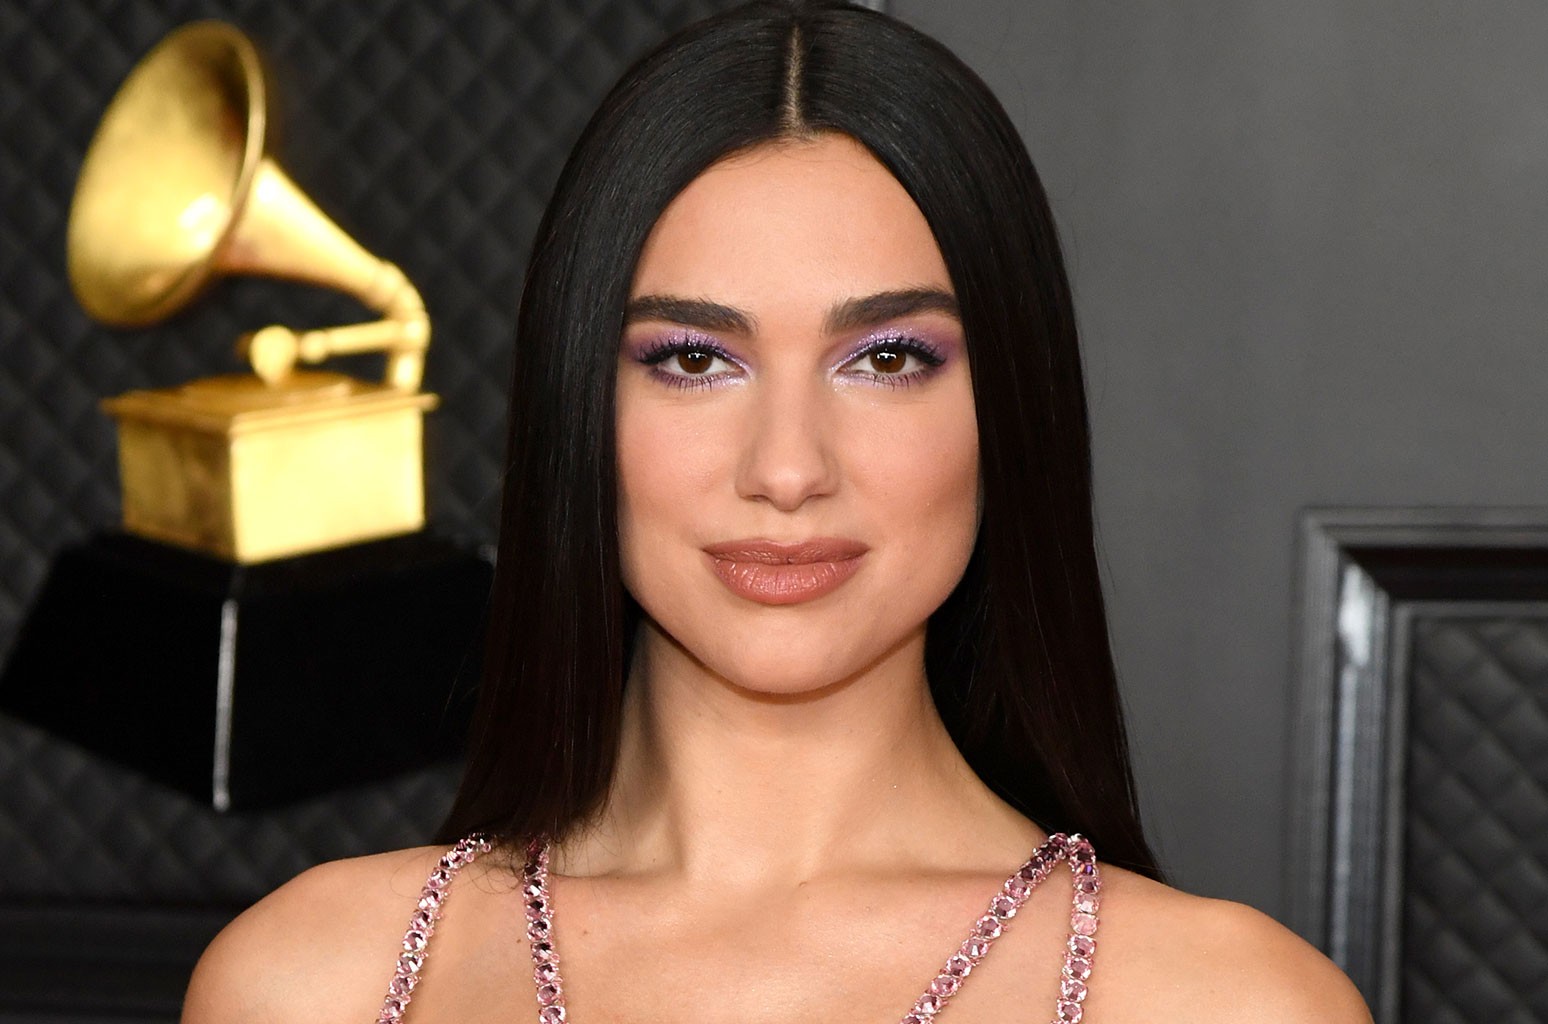 Integral Images is accusing the pop star of copyright infringement over a Feb. 2019 social media post.